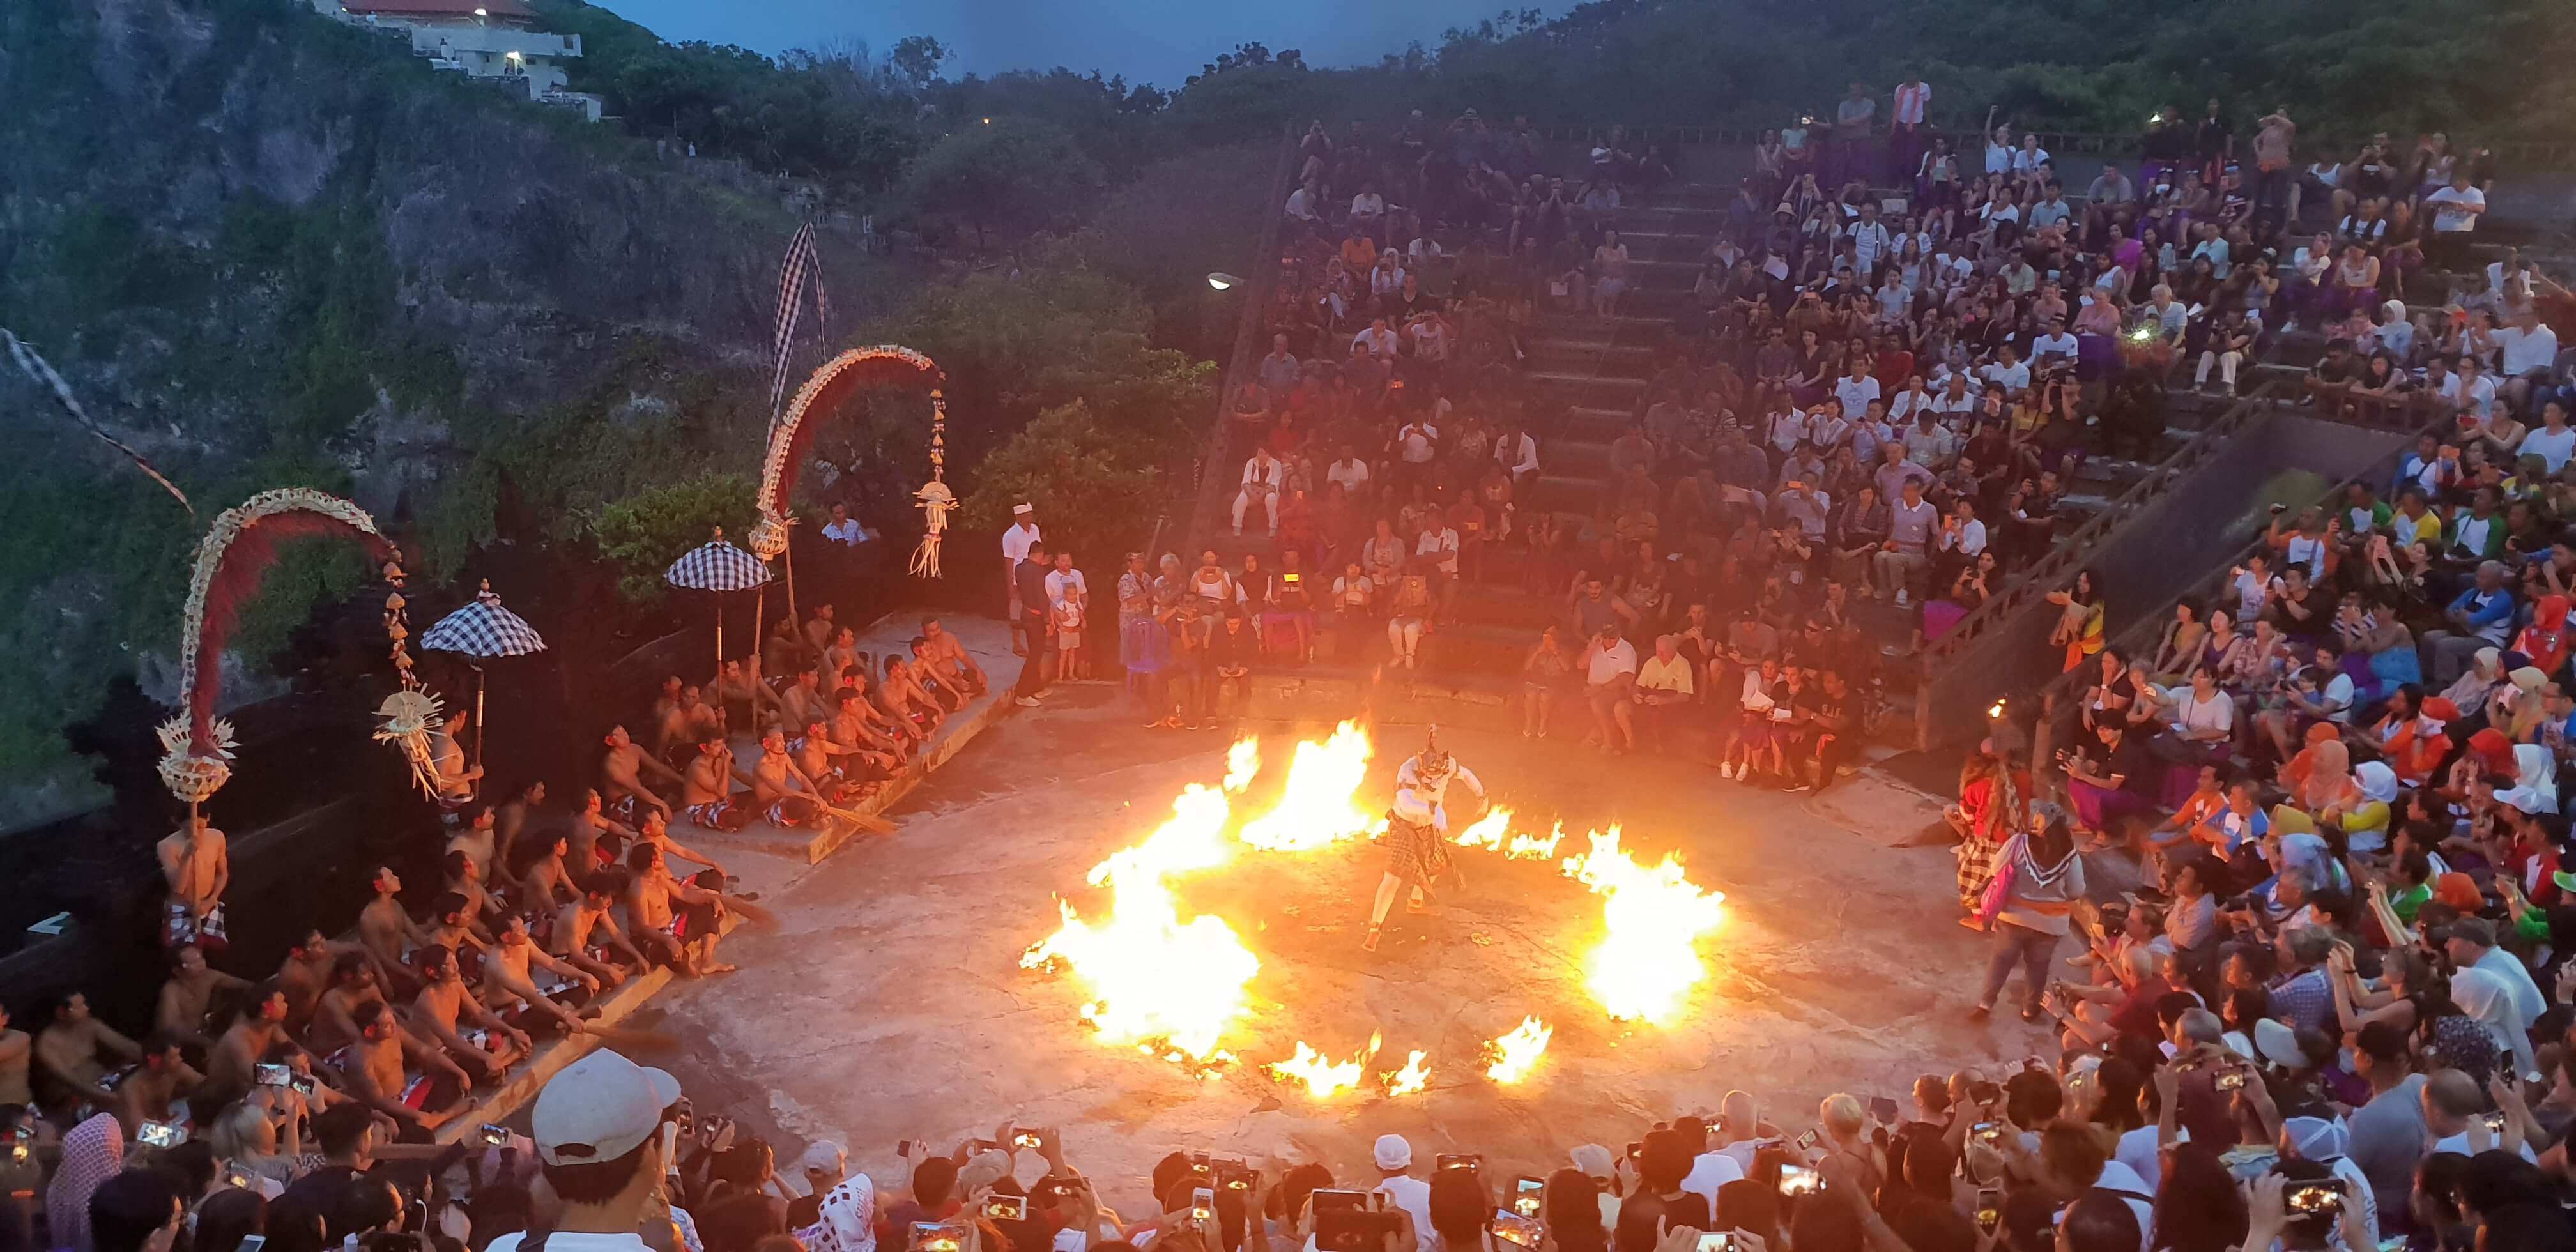 Lord Hanuman fighting against the fire in the Kecak and fire dance show